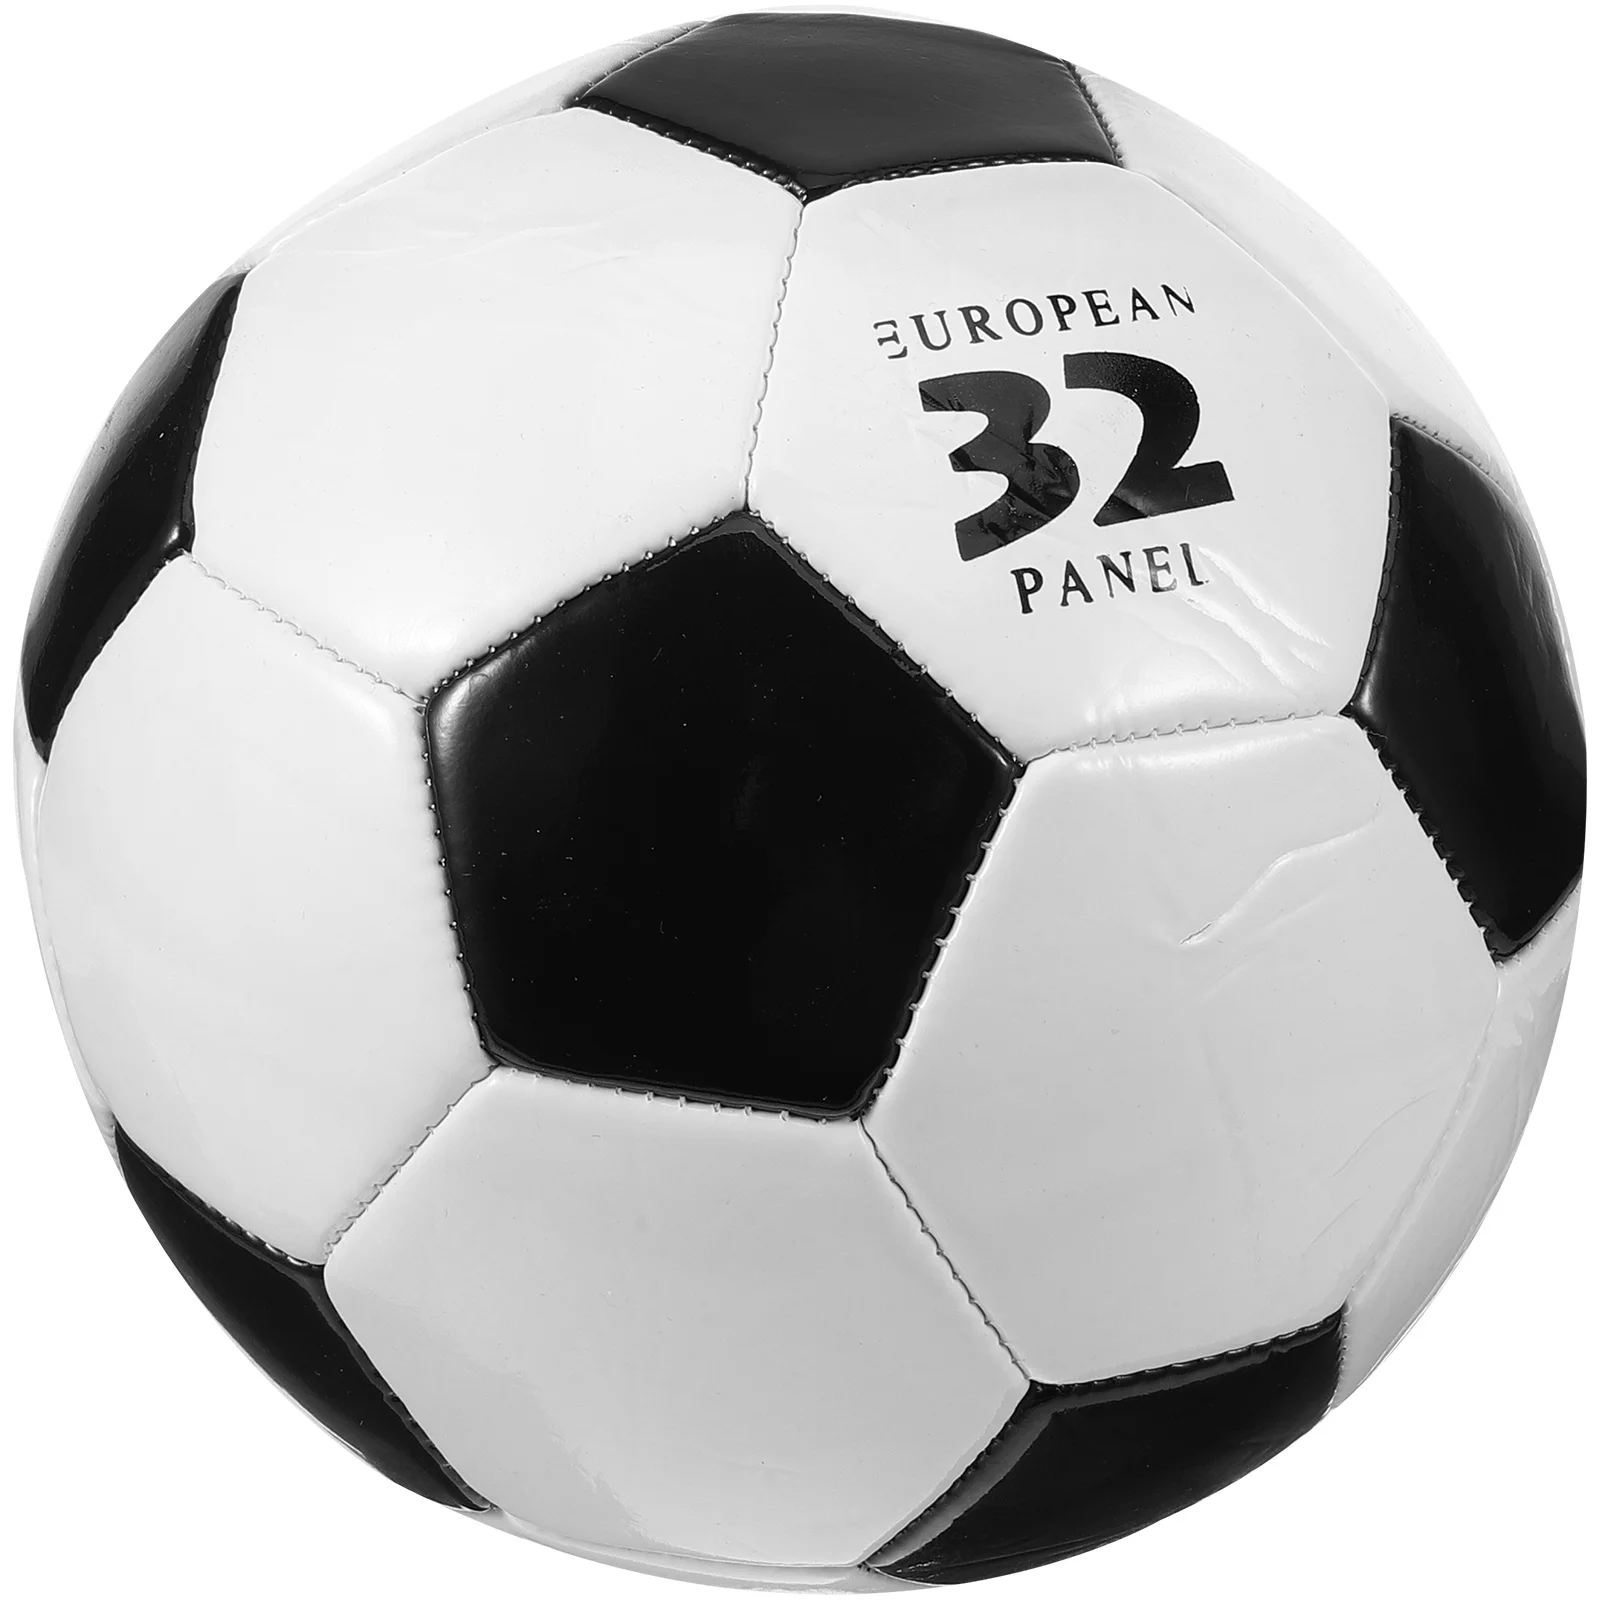 

Portable Exercising Ball Reusable Soccer Ball Competition Soccer Ball Training Football Adults Supply